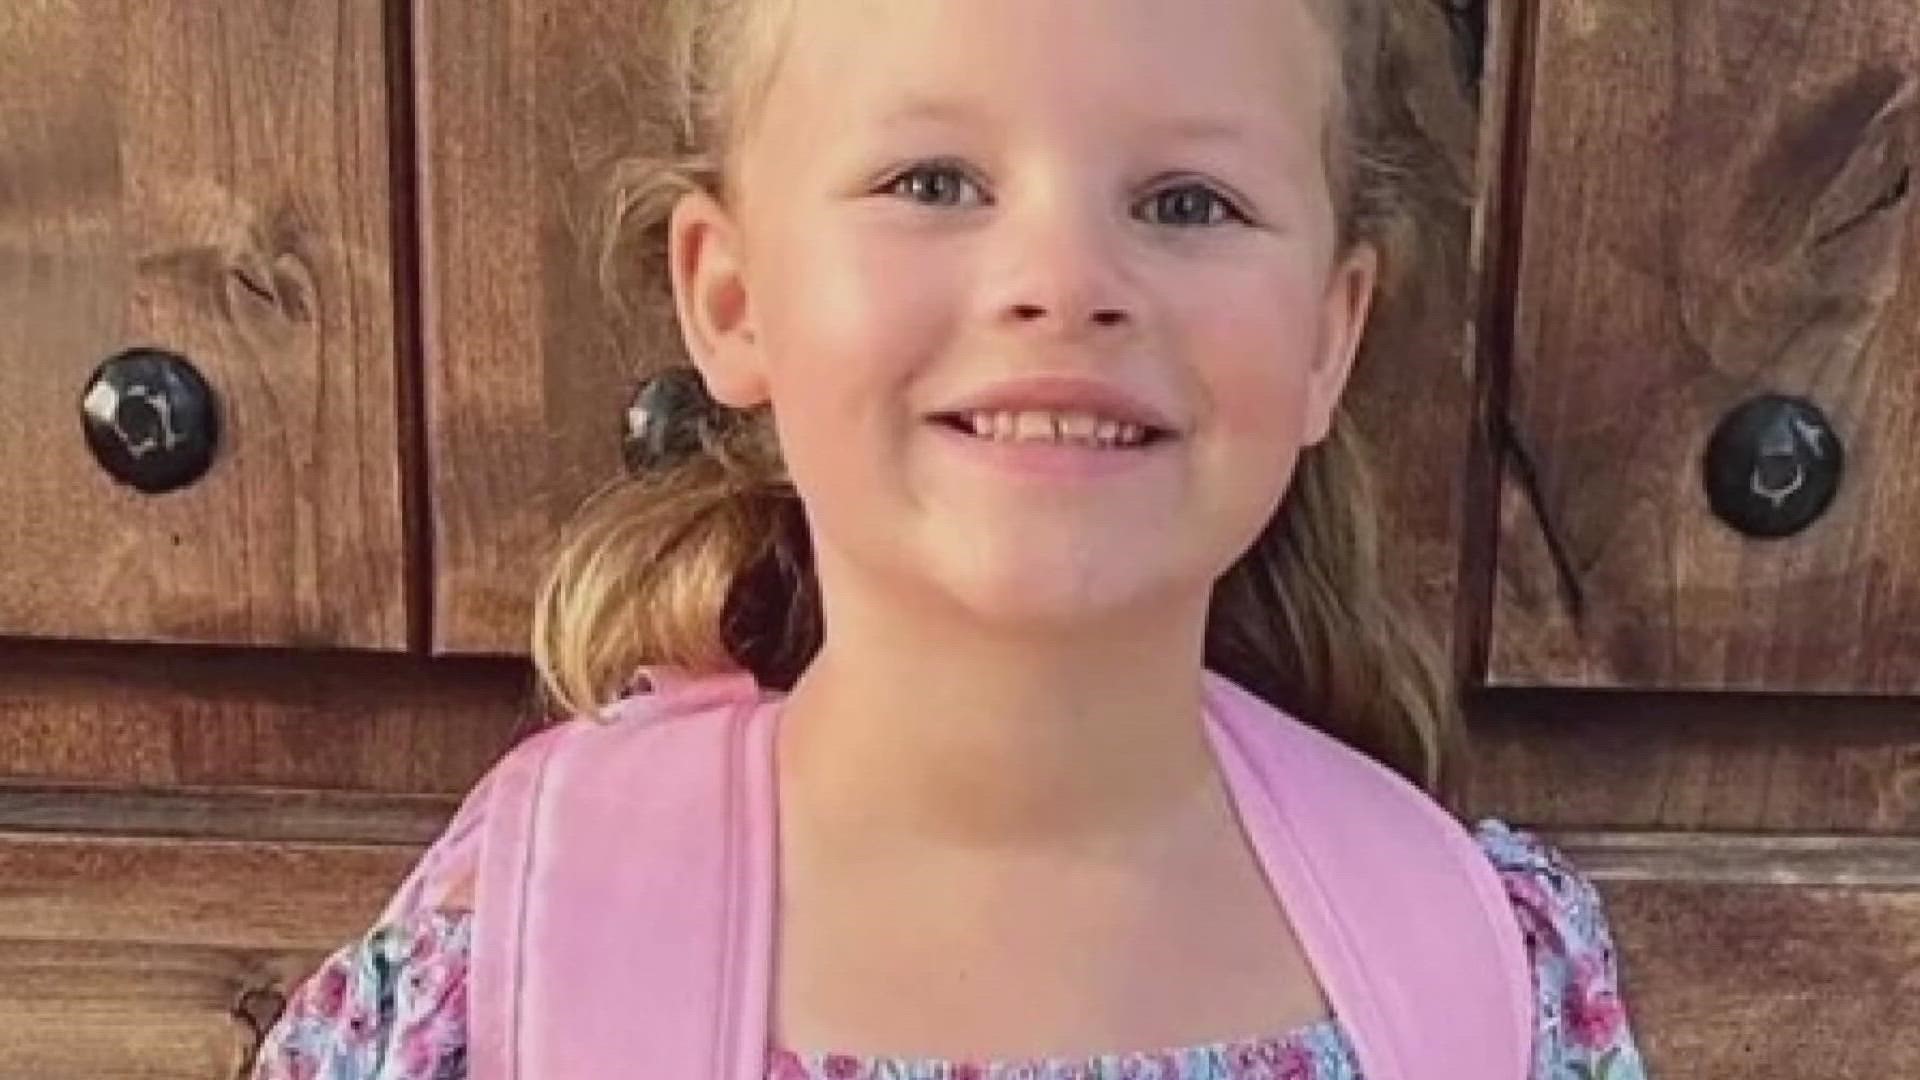 People across North Texas continued to mourn for the late Athena Strand on Monday with communities memorializing her tragic death by wearing her favorite color.